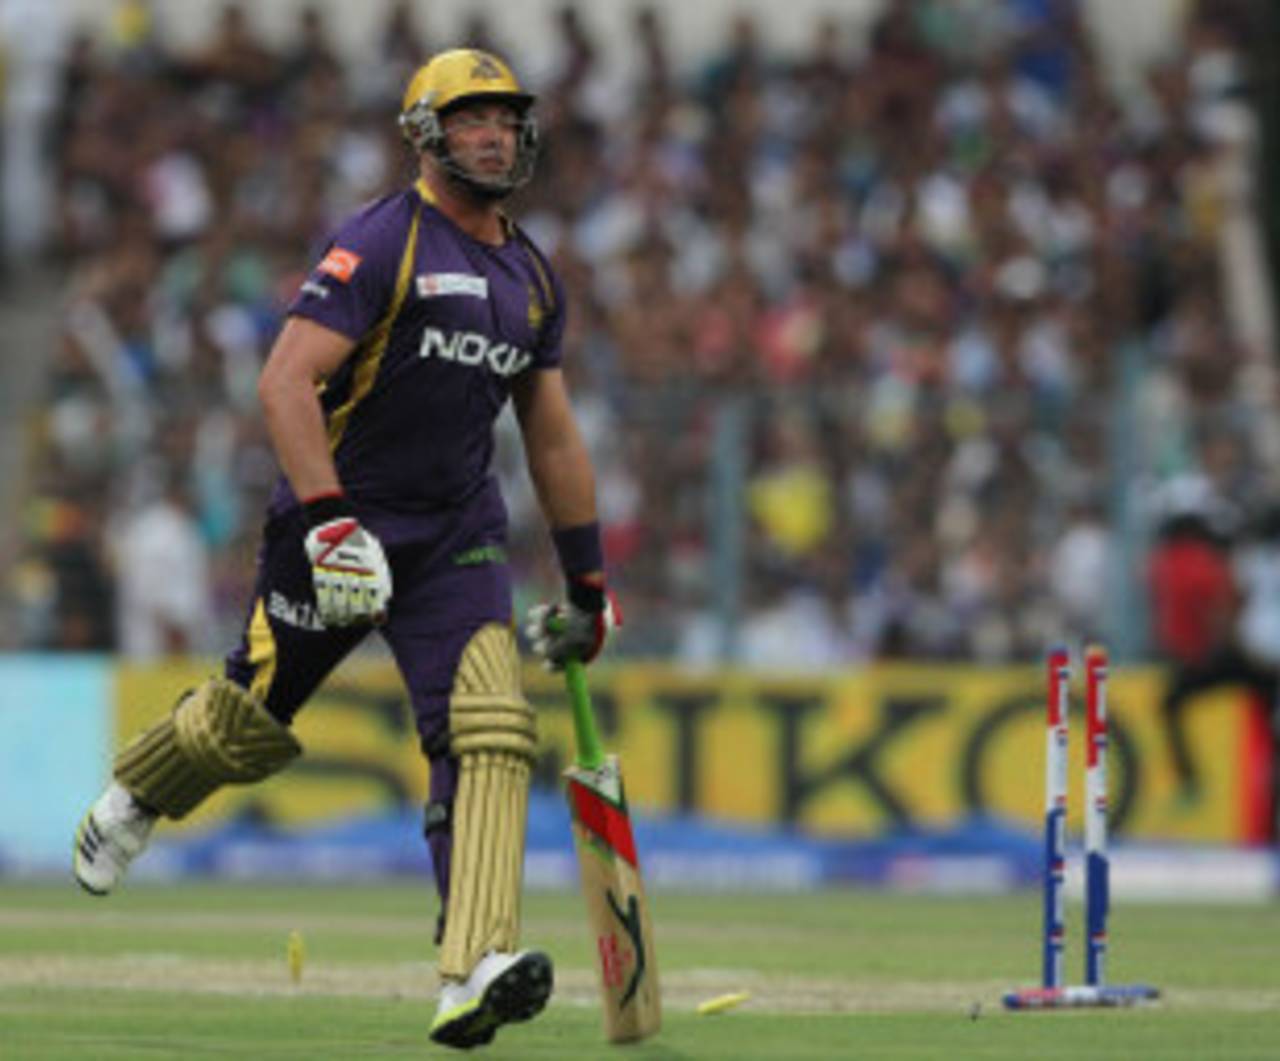 Jacques Kallis' only diamond duck in international and T20 cricket has come in the IPL&nbsp;&nbsp;&bull;&nbsp;&nbsp;BCCI